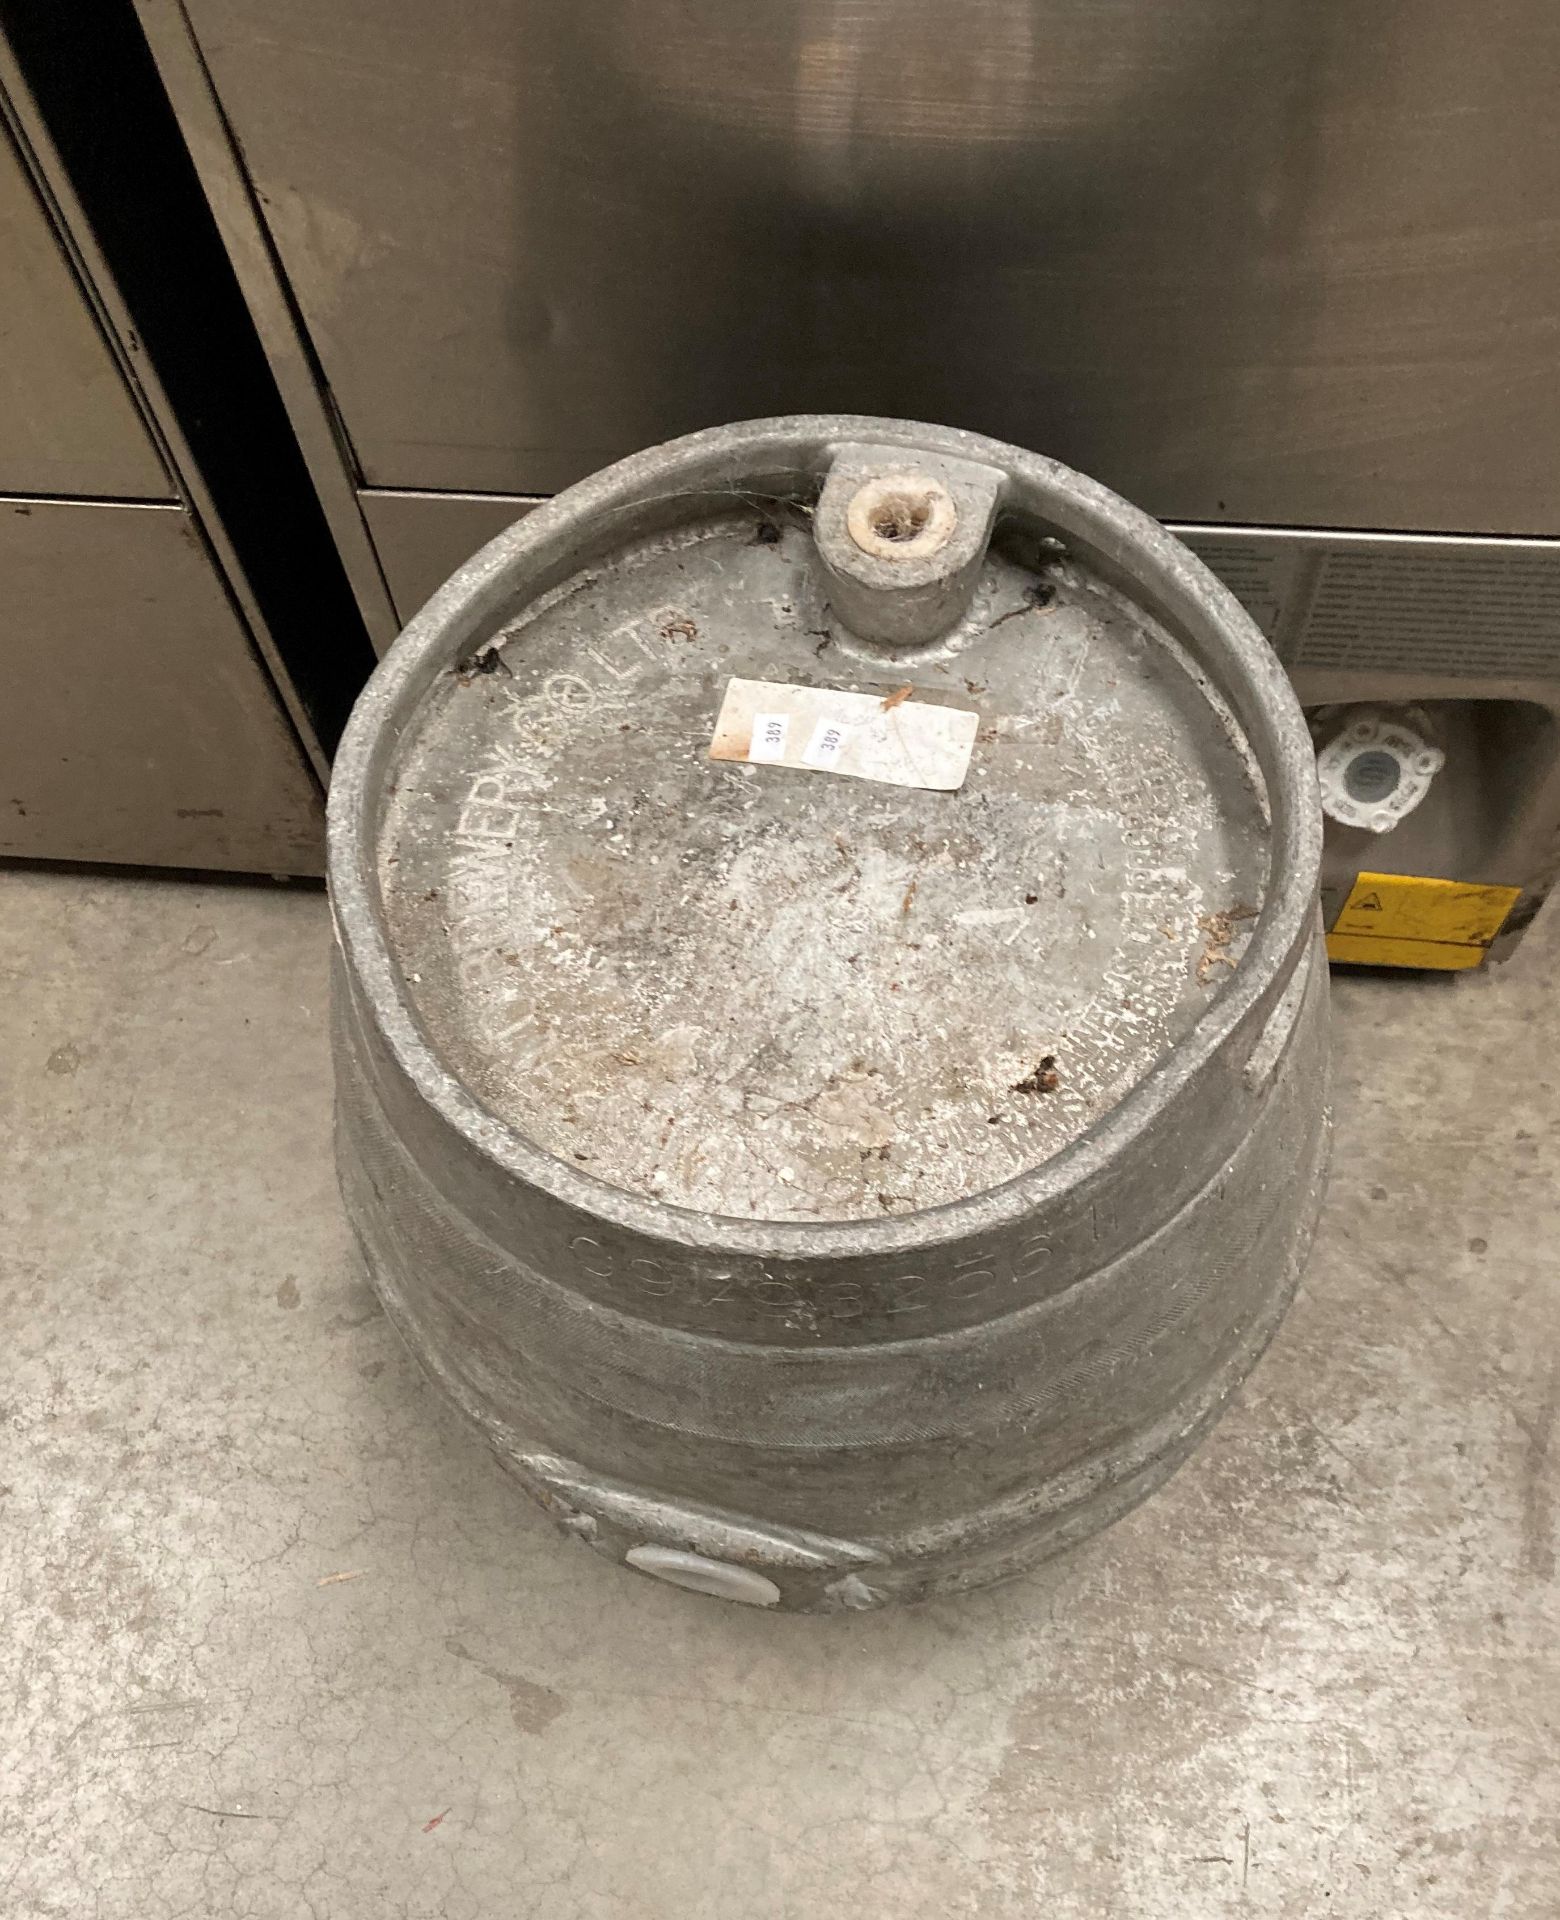 Two hand beer pumps and a keg containing out of date beer/lager - stamped "property of Mansfield - Image 2 of 2